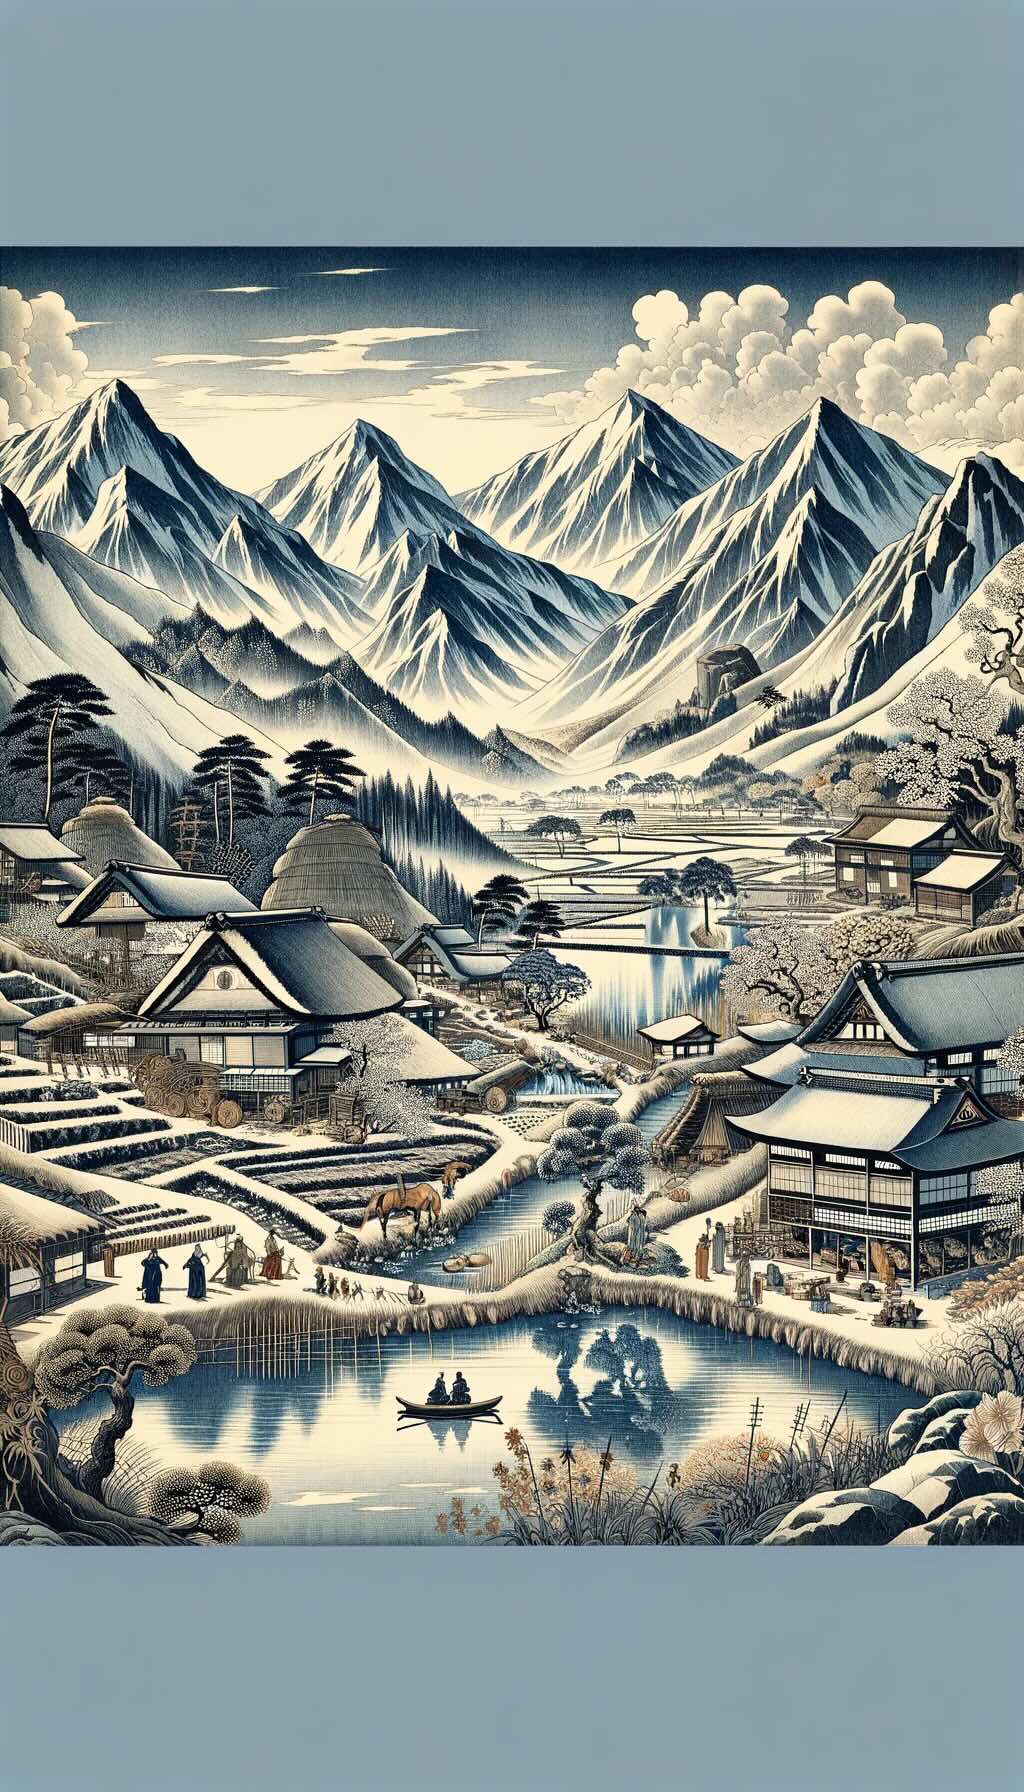 Influence of mountain villages on Japanese arts, literature, and tradition beautifully illustrates the inspiration drawn from haiku poetry and ukiyo-e art, and portrays traditional Japanese practices preserved in mountain villages. 